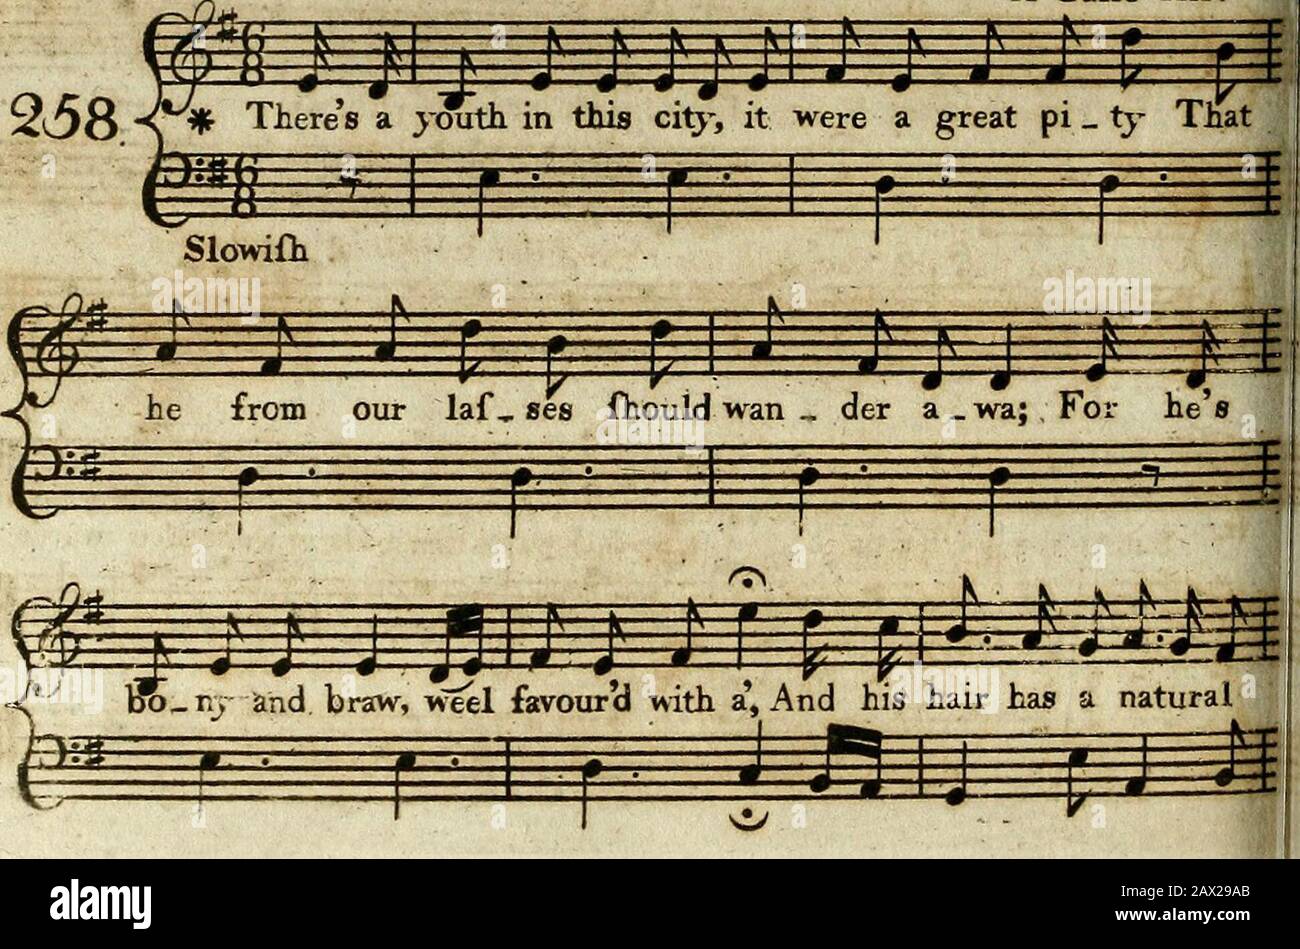 The Scots musical museum : humbly dedicated to the Catch Club instituted at Edinr June 1771 by James Johnson . Go bid the hero who has run And (hare the fate I would impofe I Thro* fields of death to gather fame, On thee, wert thou my captive too. • ^»« ^ - ^ - ^fc - -^ • it- • ^« it* -^ • ifc&gt; • ik* -^ •^T 7|» T^T /f^, /^ ^ ^p *p IV *^ ^^ ^K ^K T» 1* •K *T&gt; Theres a youth in this City. r . .... Stock Photo